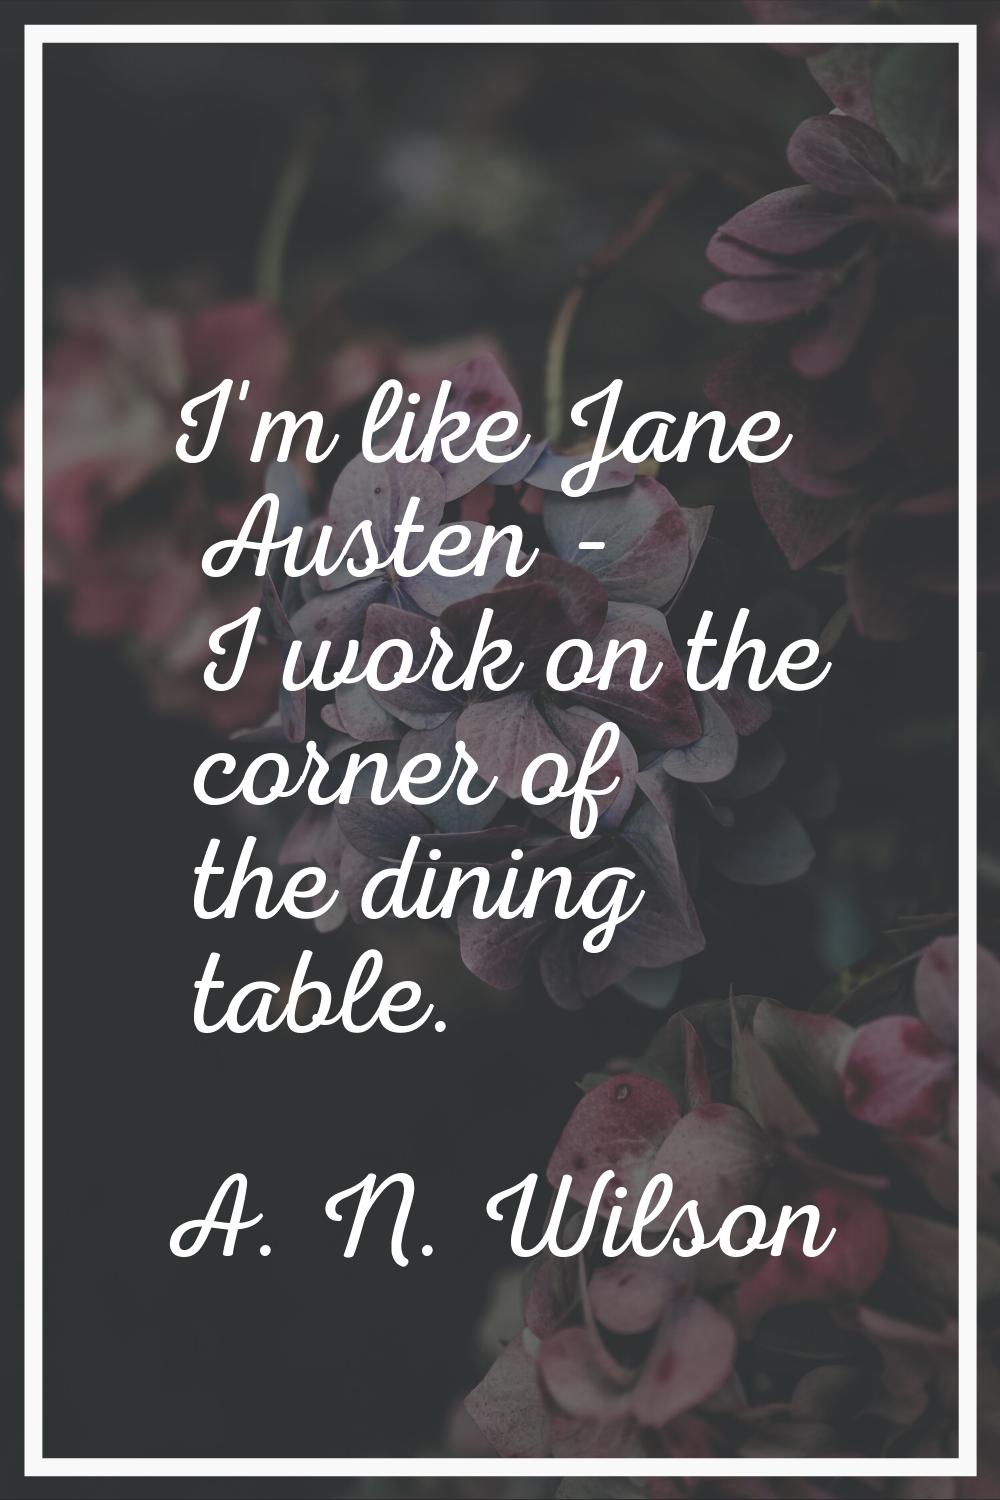 I'm like Jane Austen - I work on the corner of the dining table.